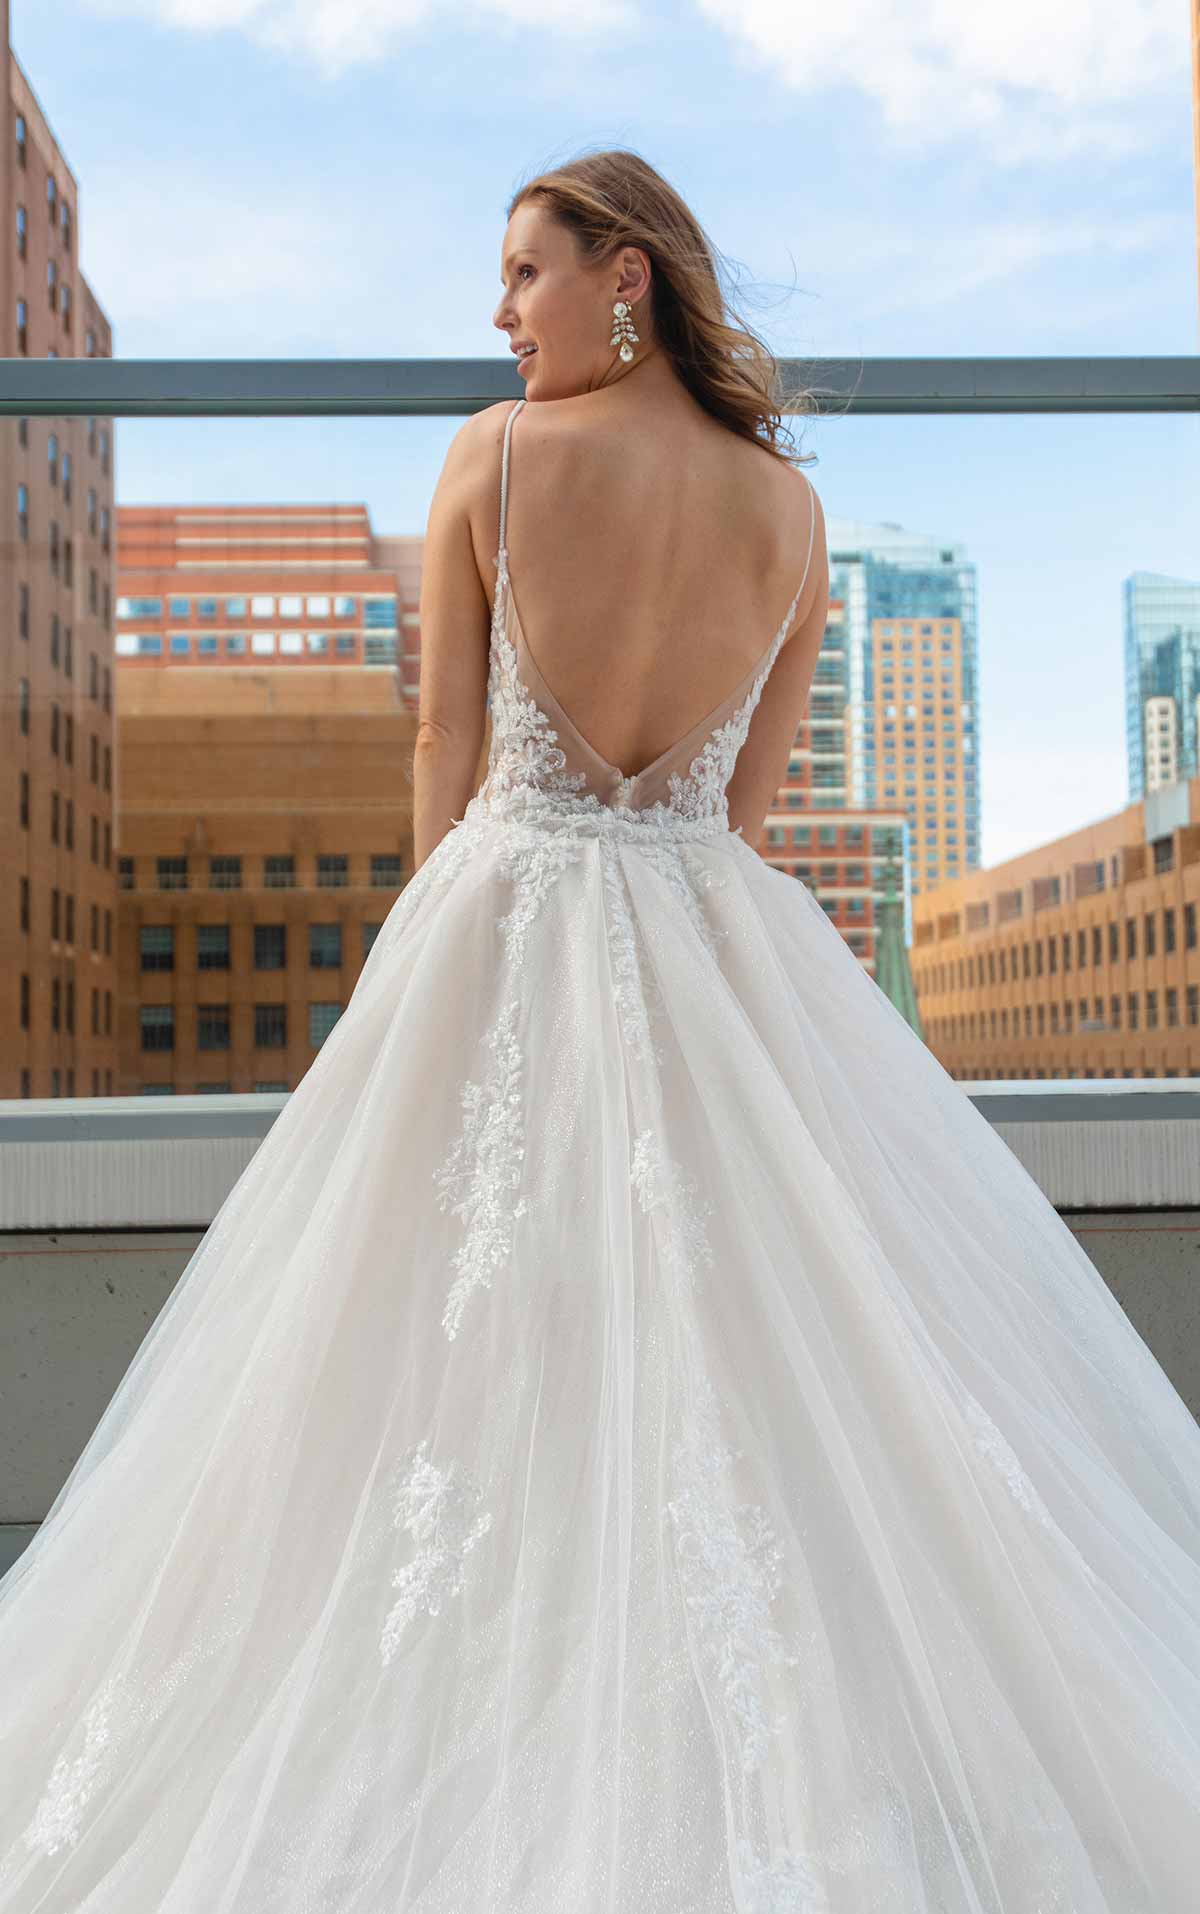 LE1125 Sleek Fit-and-Flare Beaded Wedding Gown with Overskirt by Martina Liana